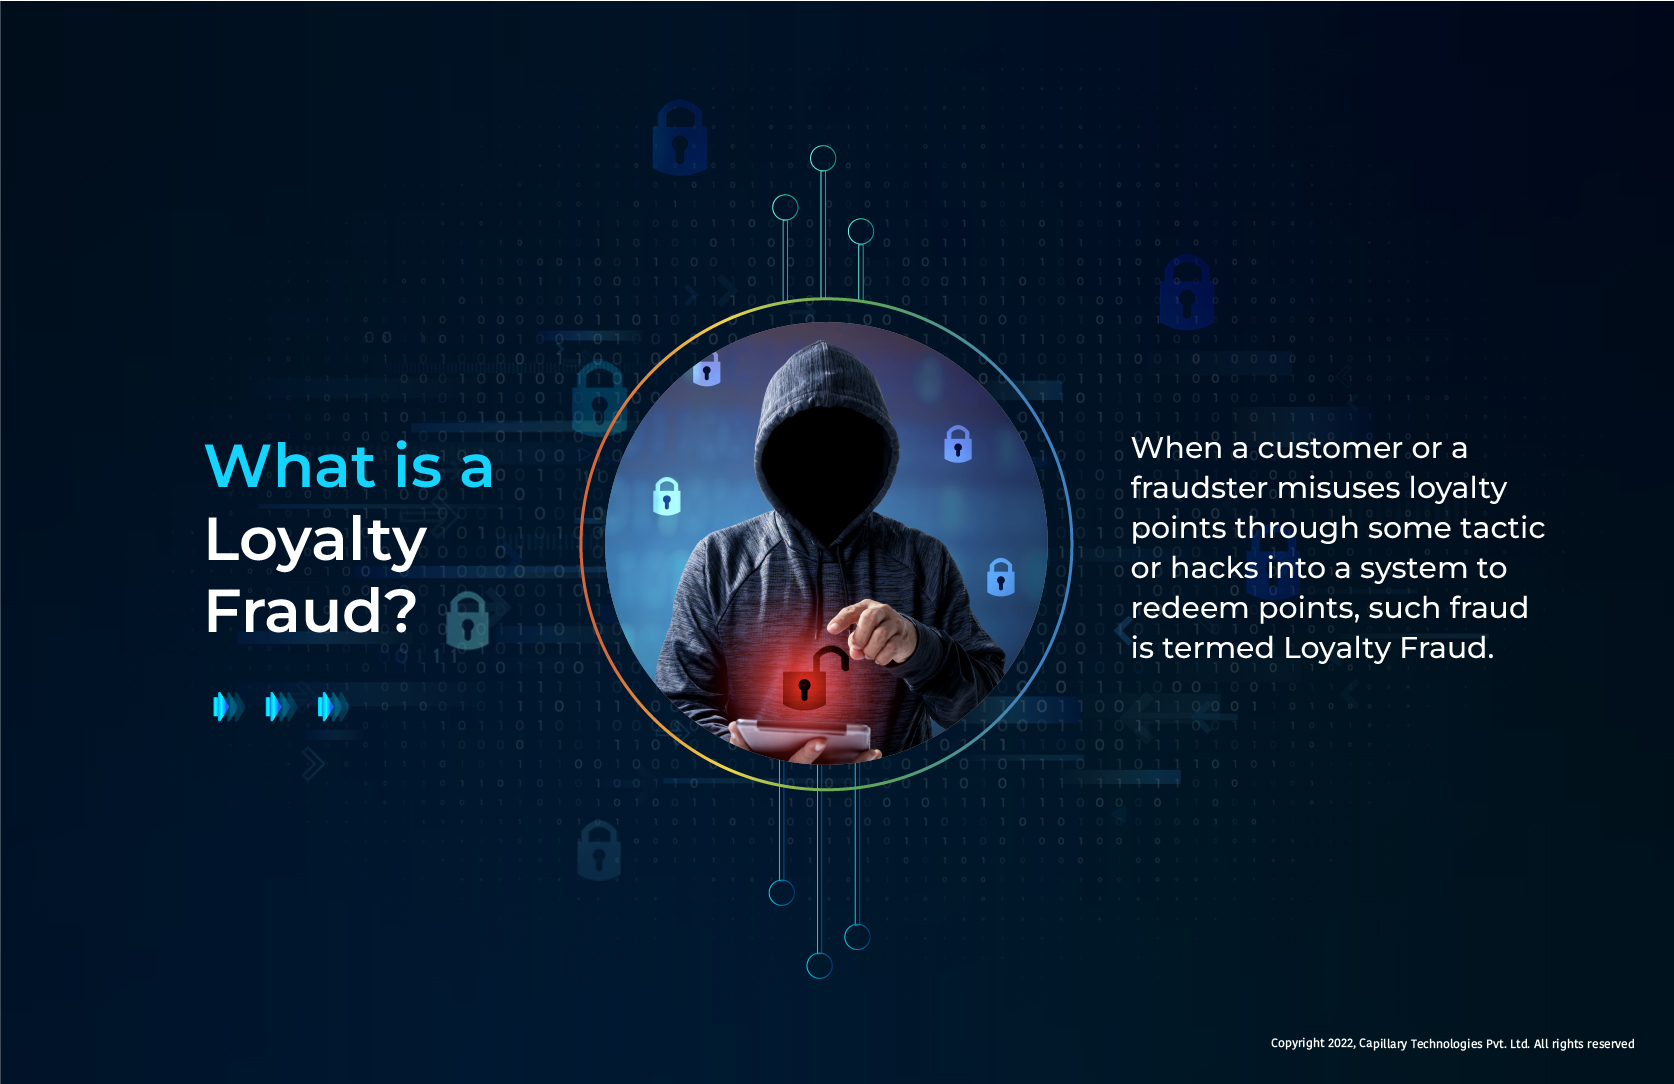 What is Loyalty Fraud